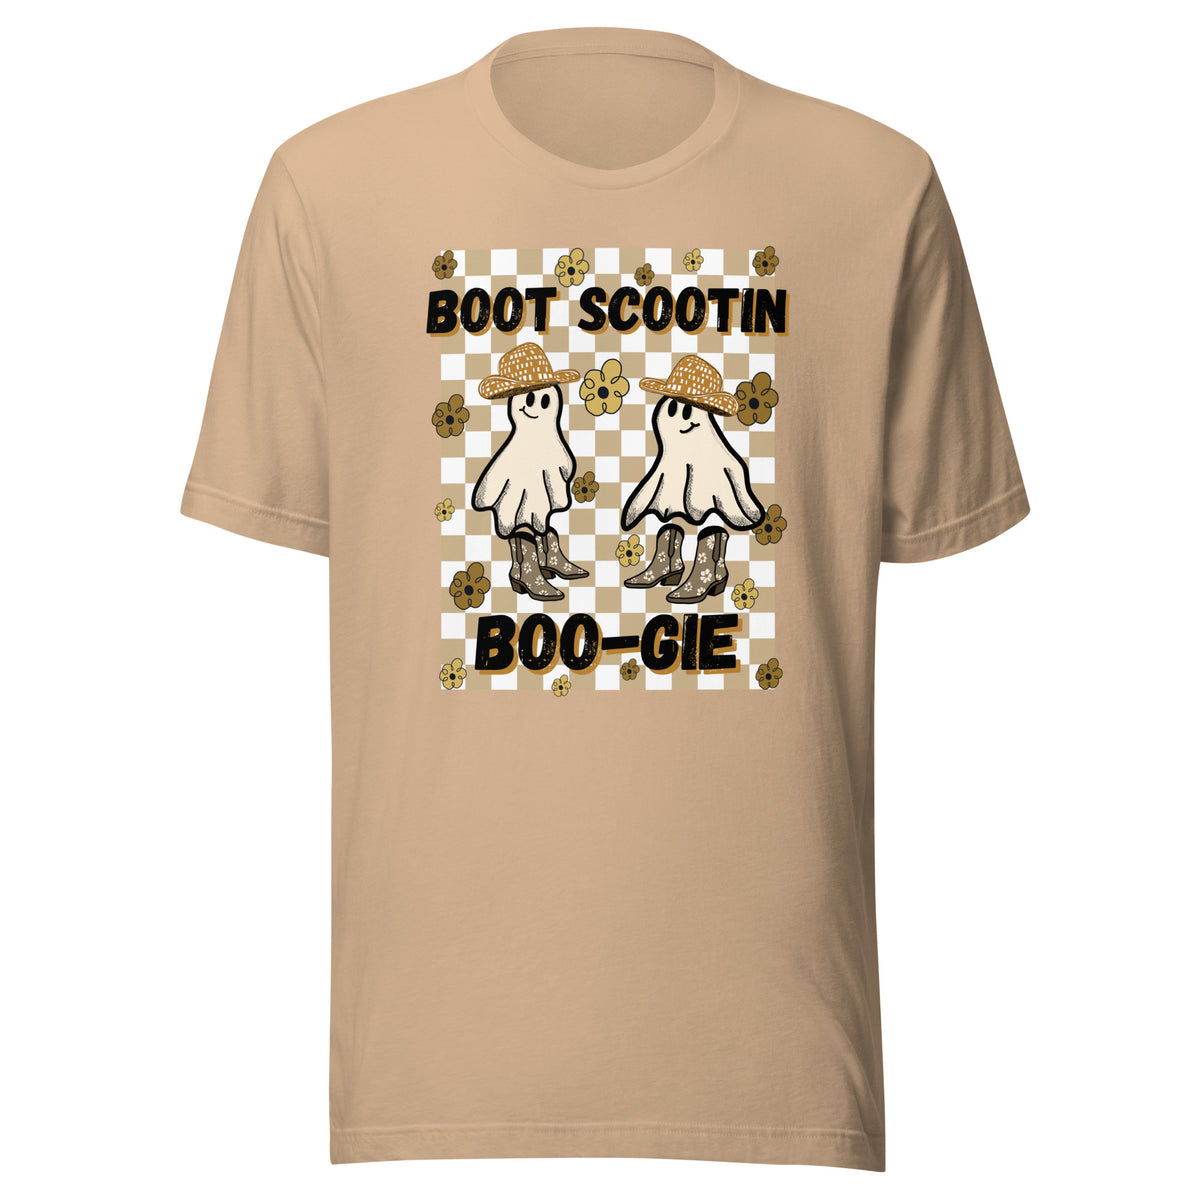 Boot Scootin' Boo-gie t-shirt